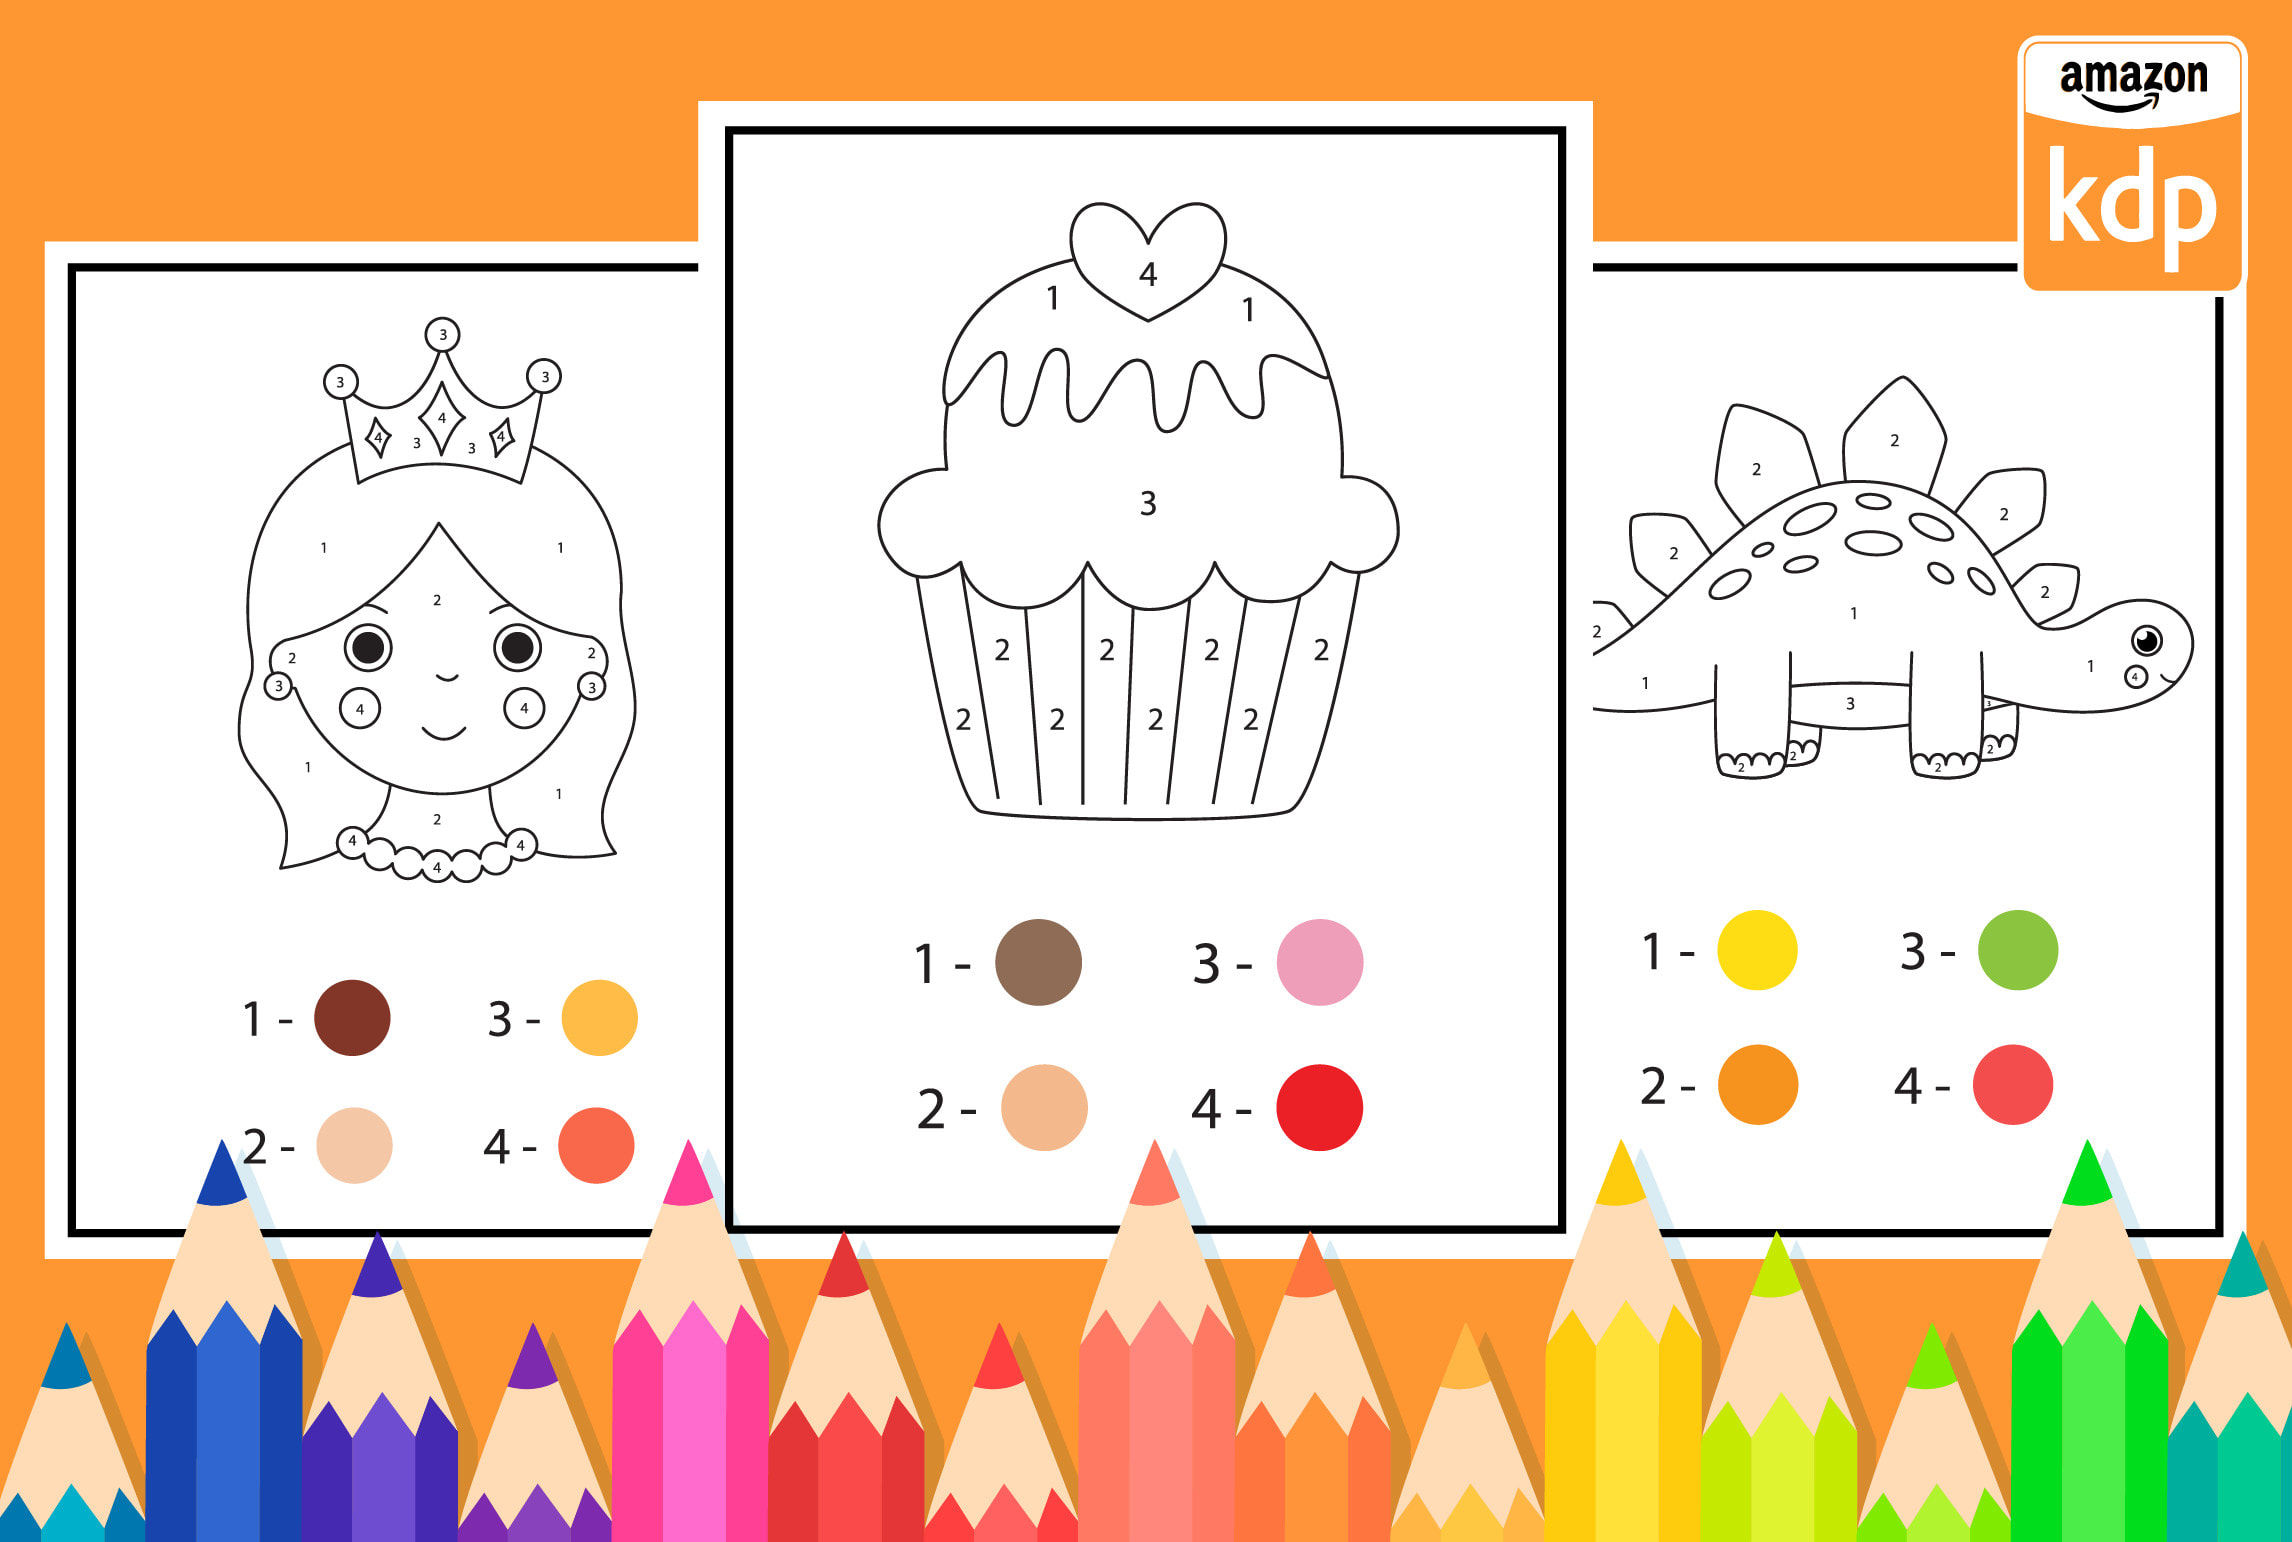 Download Create Kids Color By Number Coloring Book Pages Design For Kdp By Redwan78 Fiverr